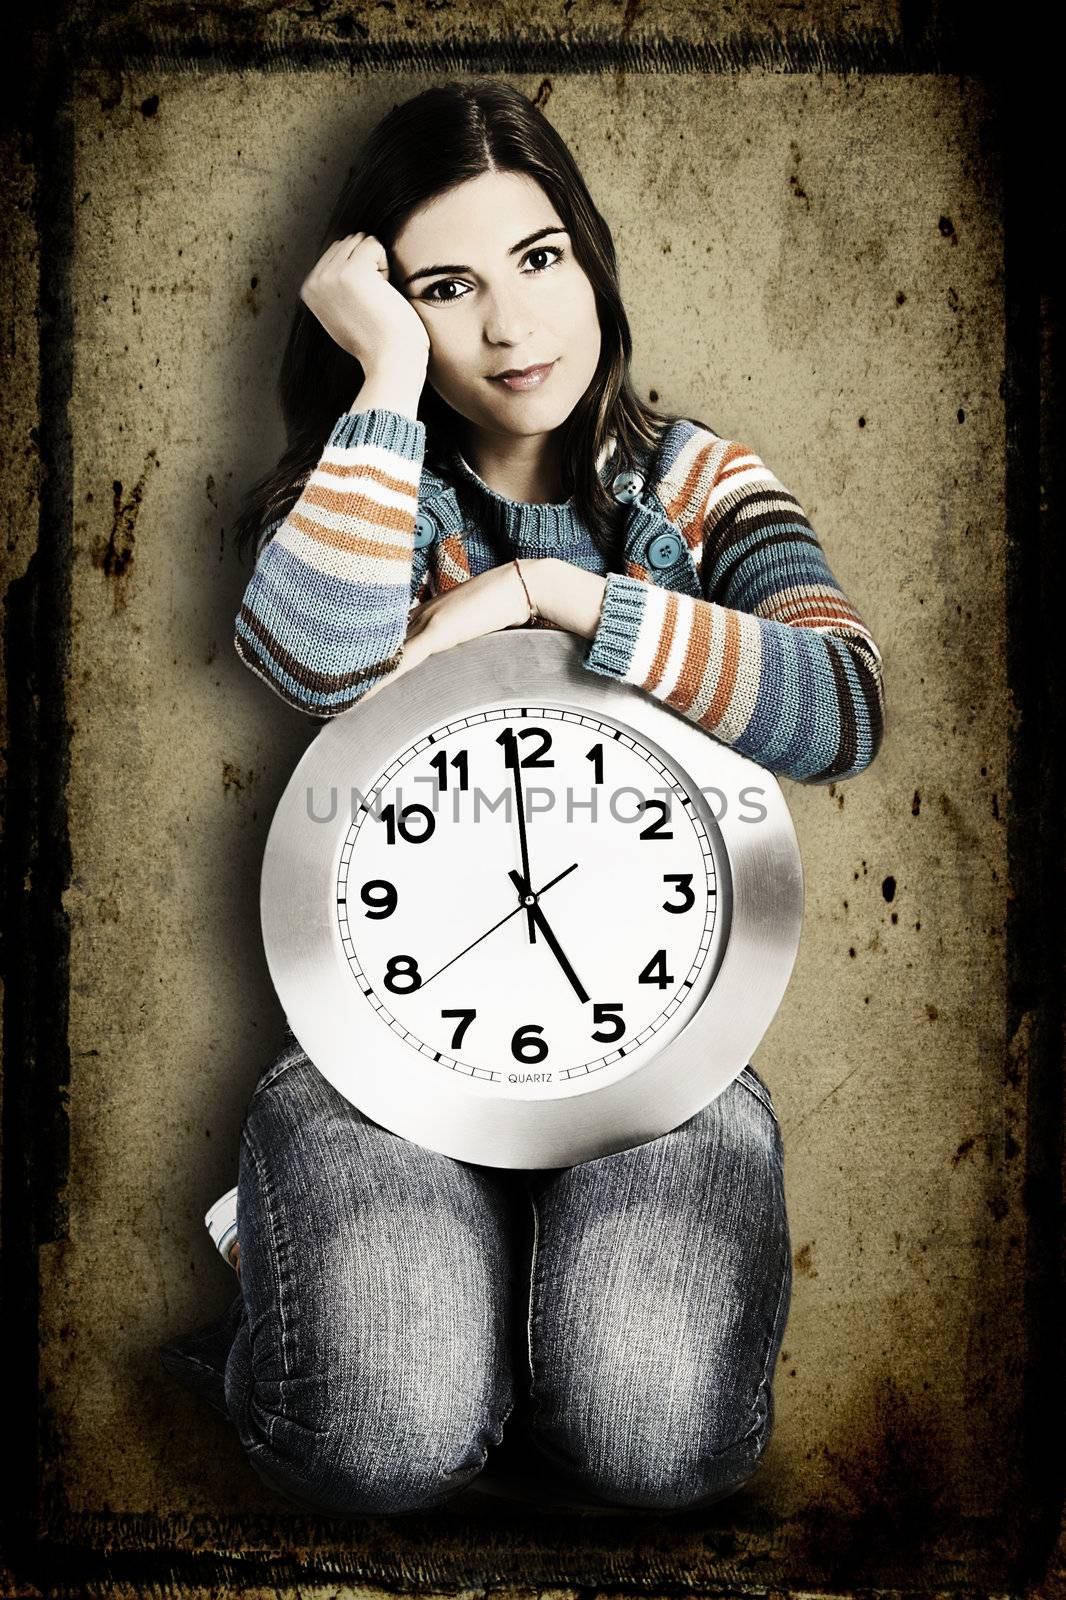 Beautiful women over knees holding a big clock with a grunge background on the back (manilpulated in PS)